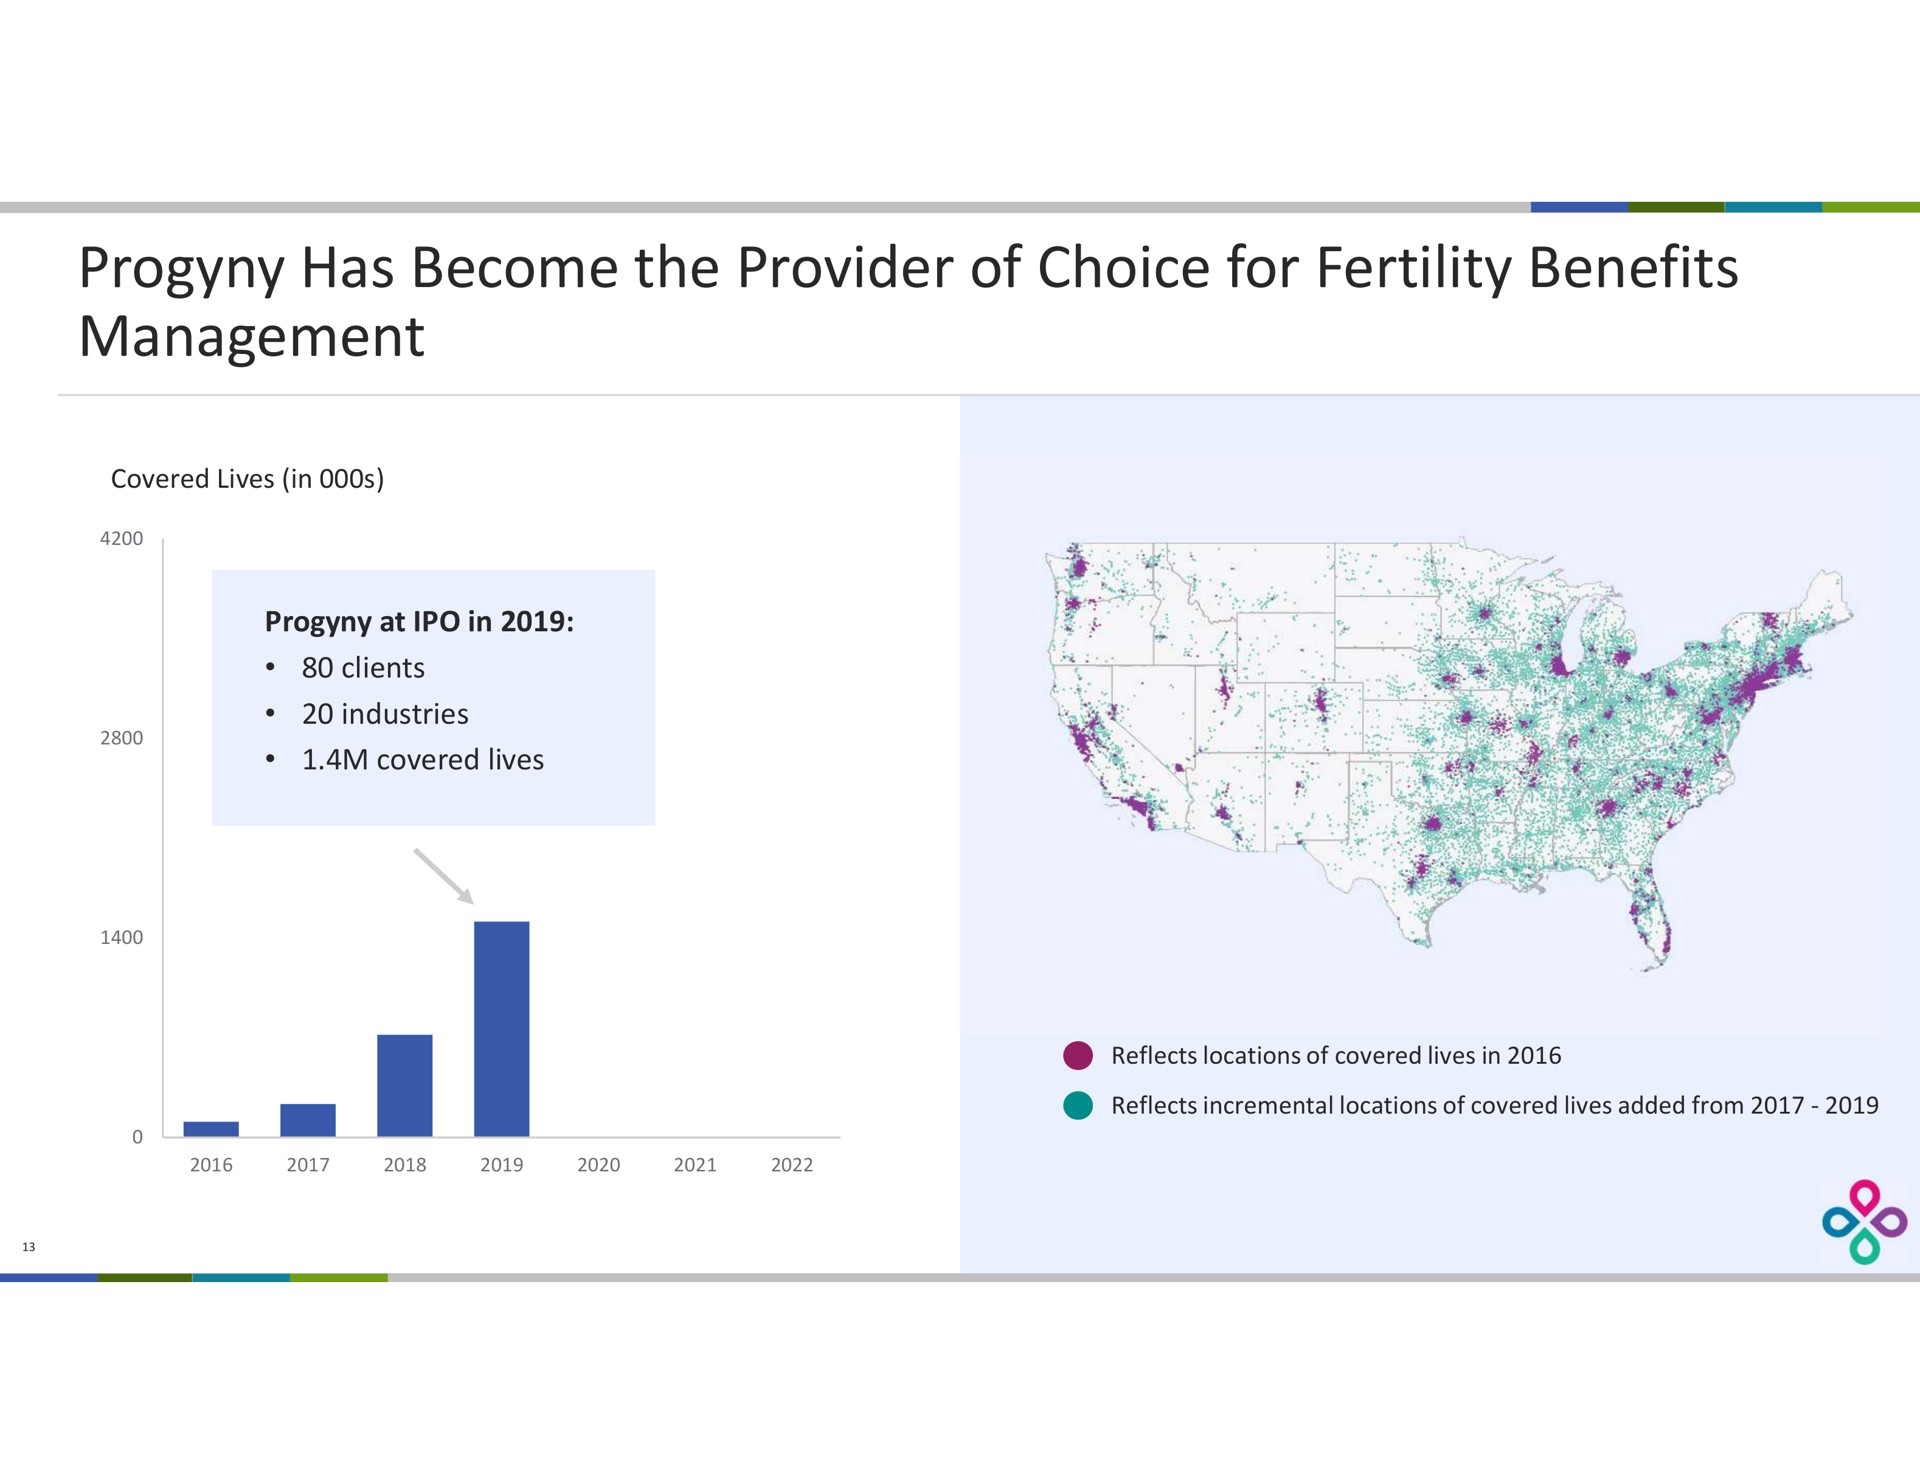 has become the provider of choice for fertility benefits management | Progyny